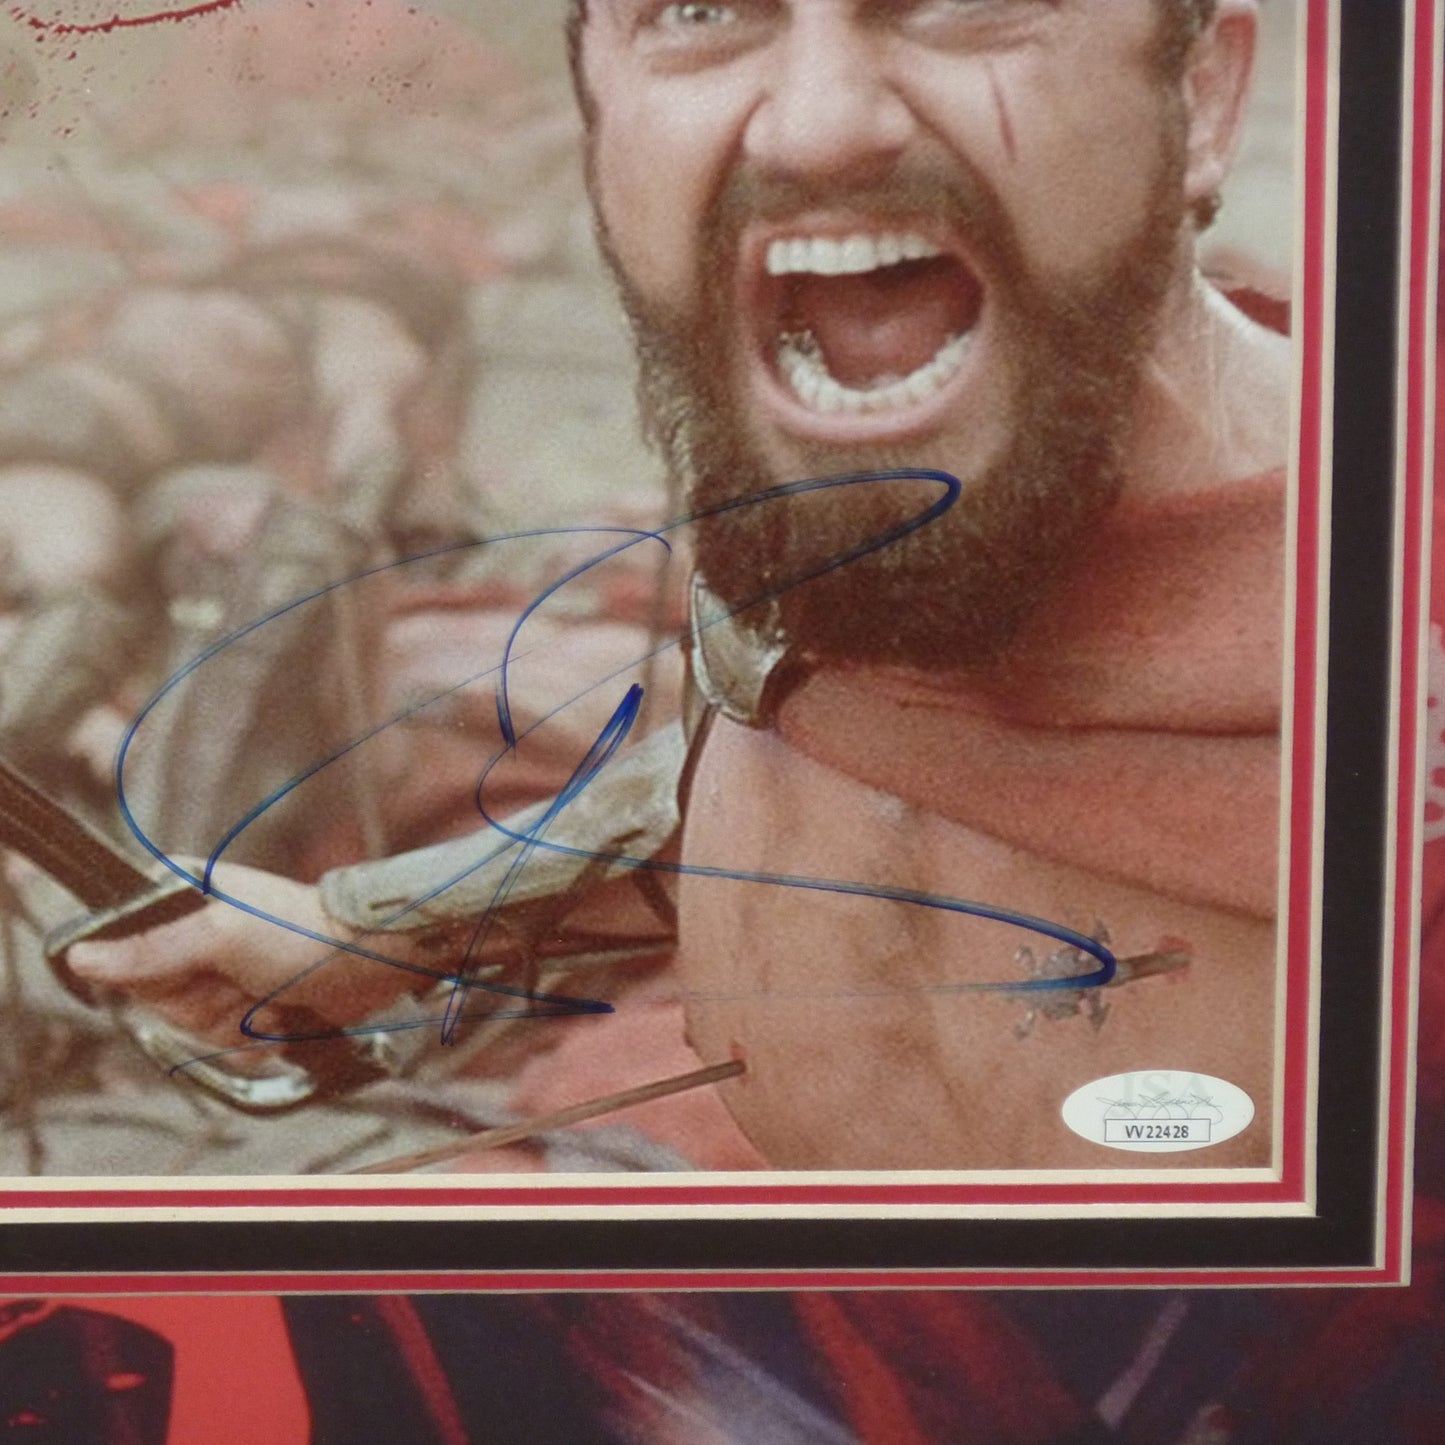 300 Full-Size Movie Poster Deluxe Framed with Gerard Butler Autograph - JSA